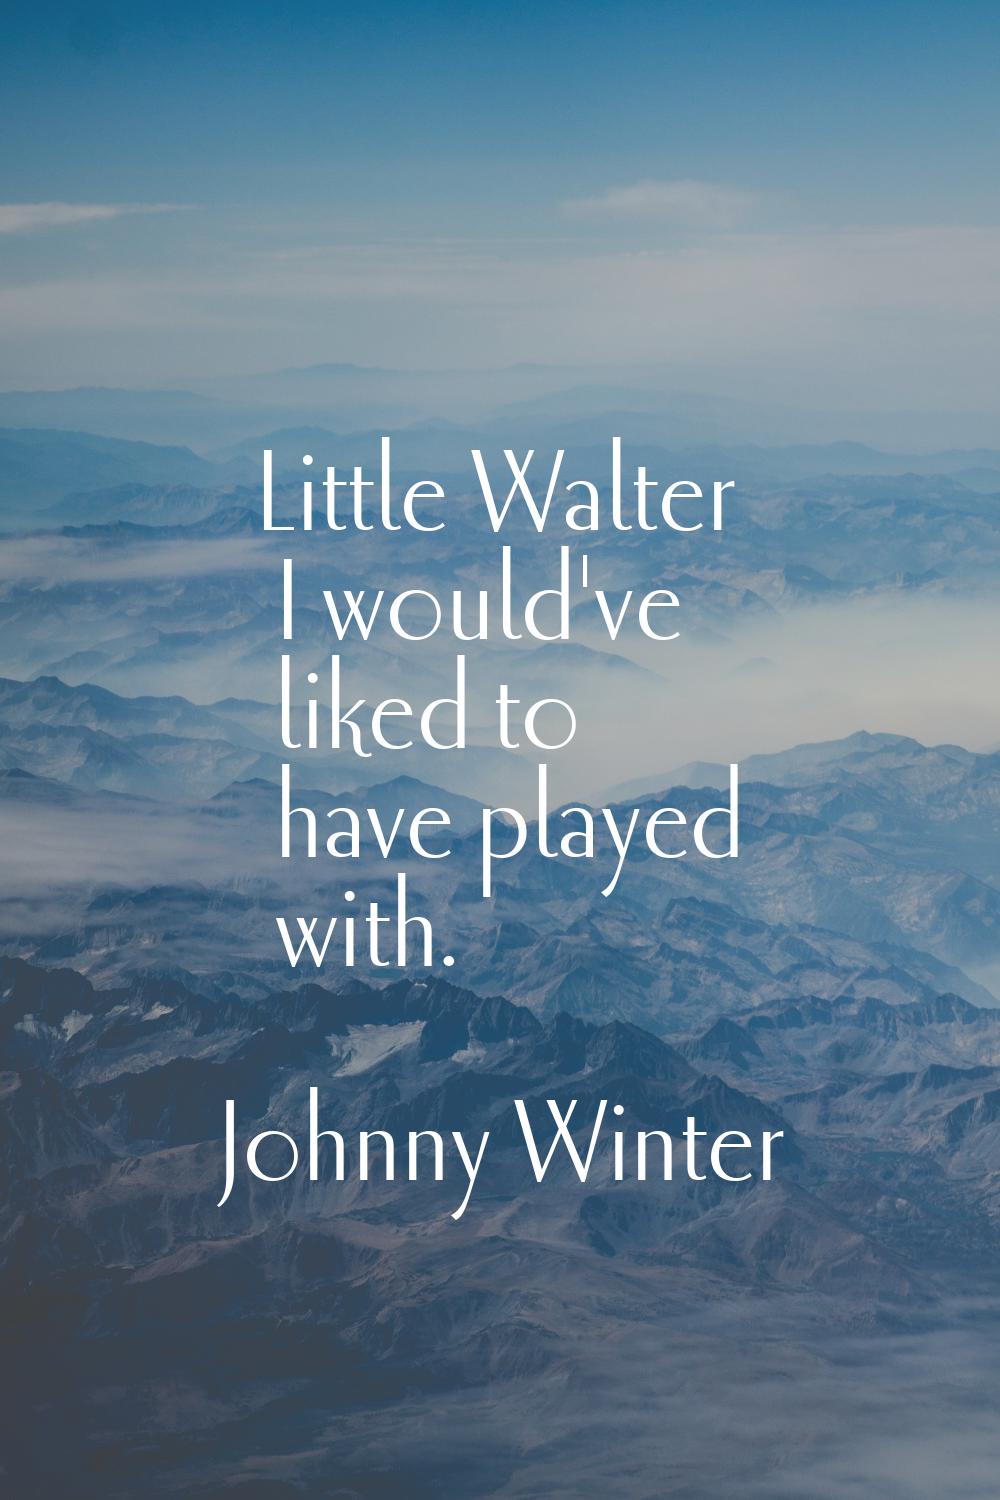 Little Walter I would've liked to have played with.